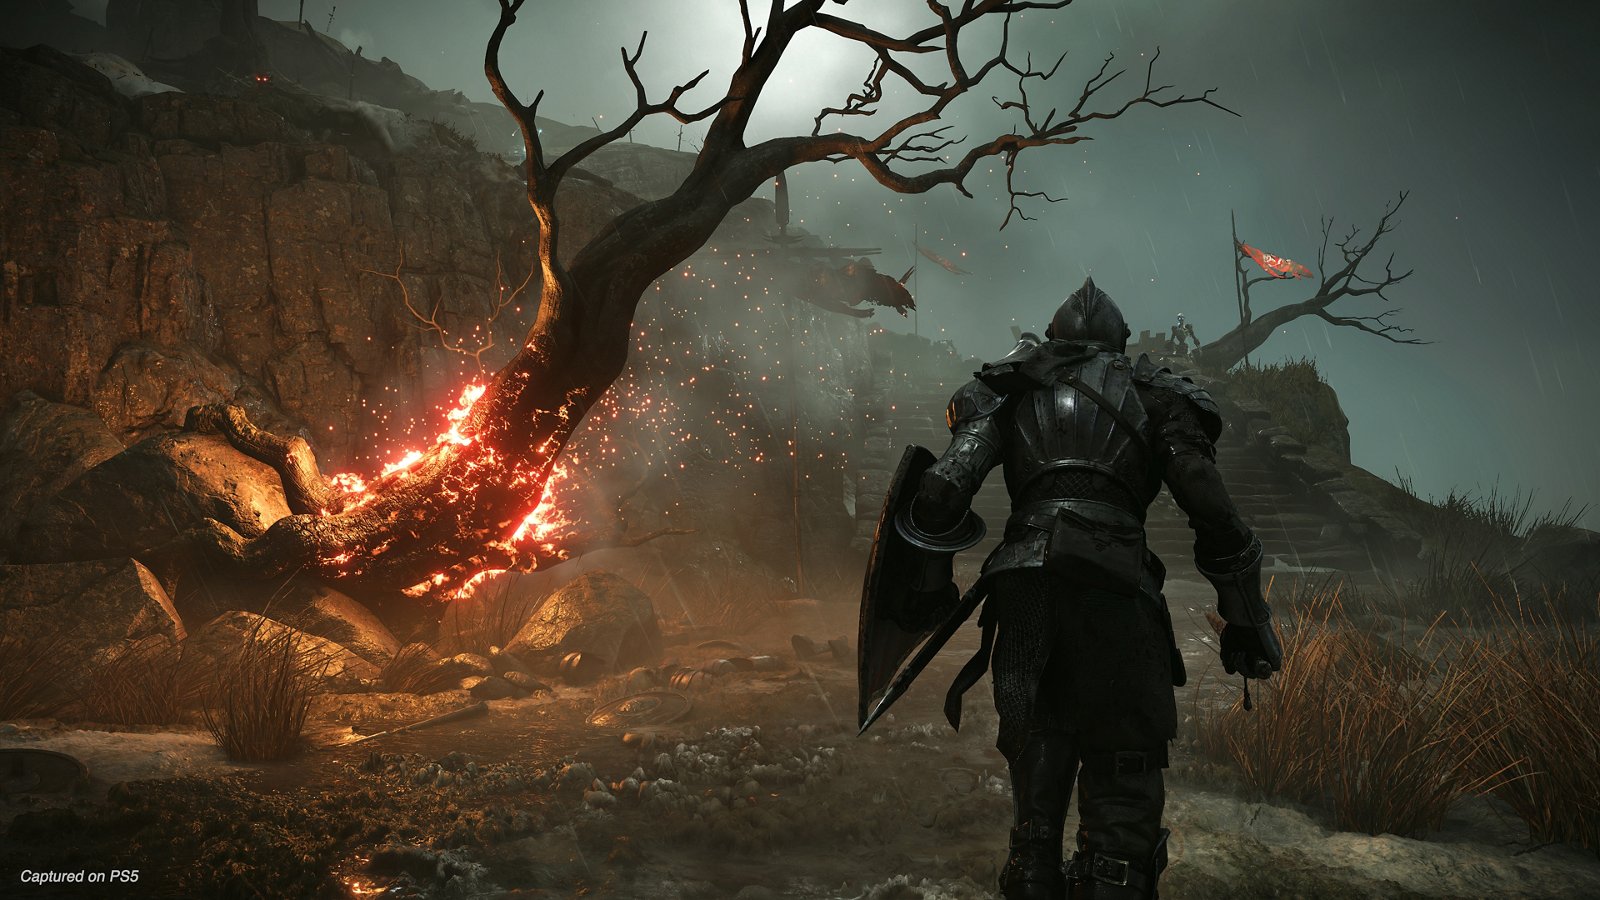 POV: You bought Playstation Plus to play Bloodborne on PC 